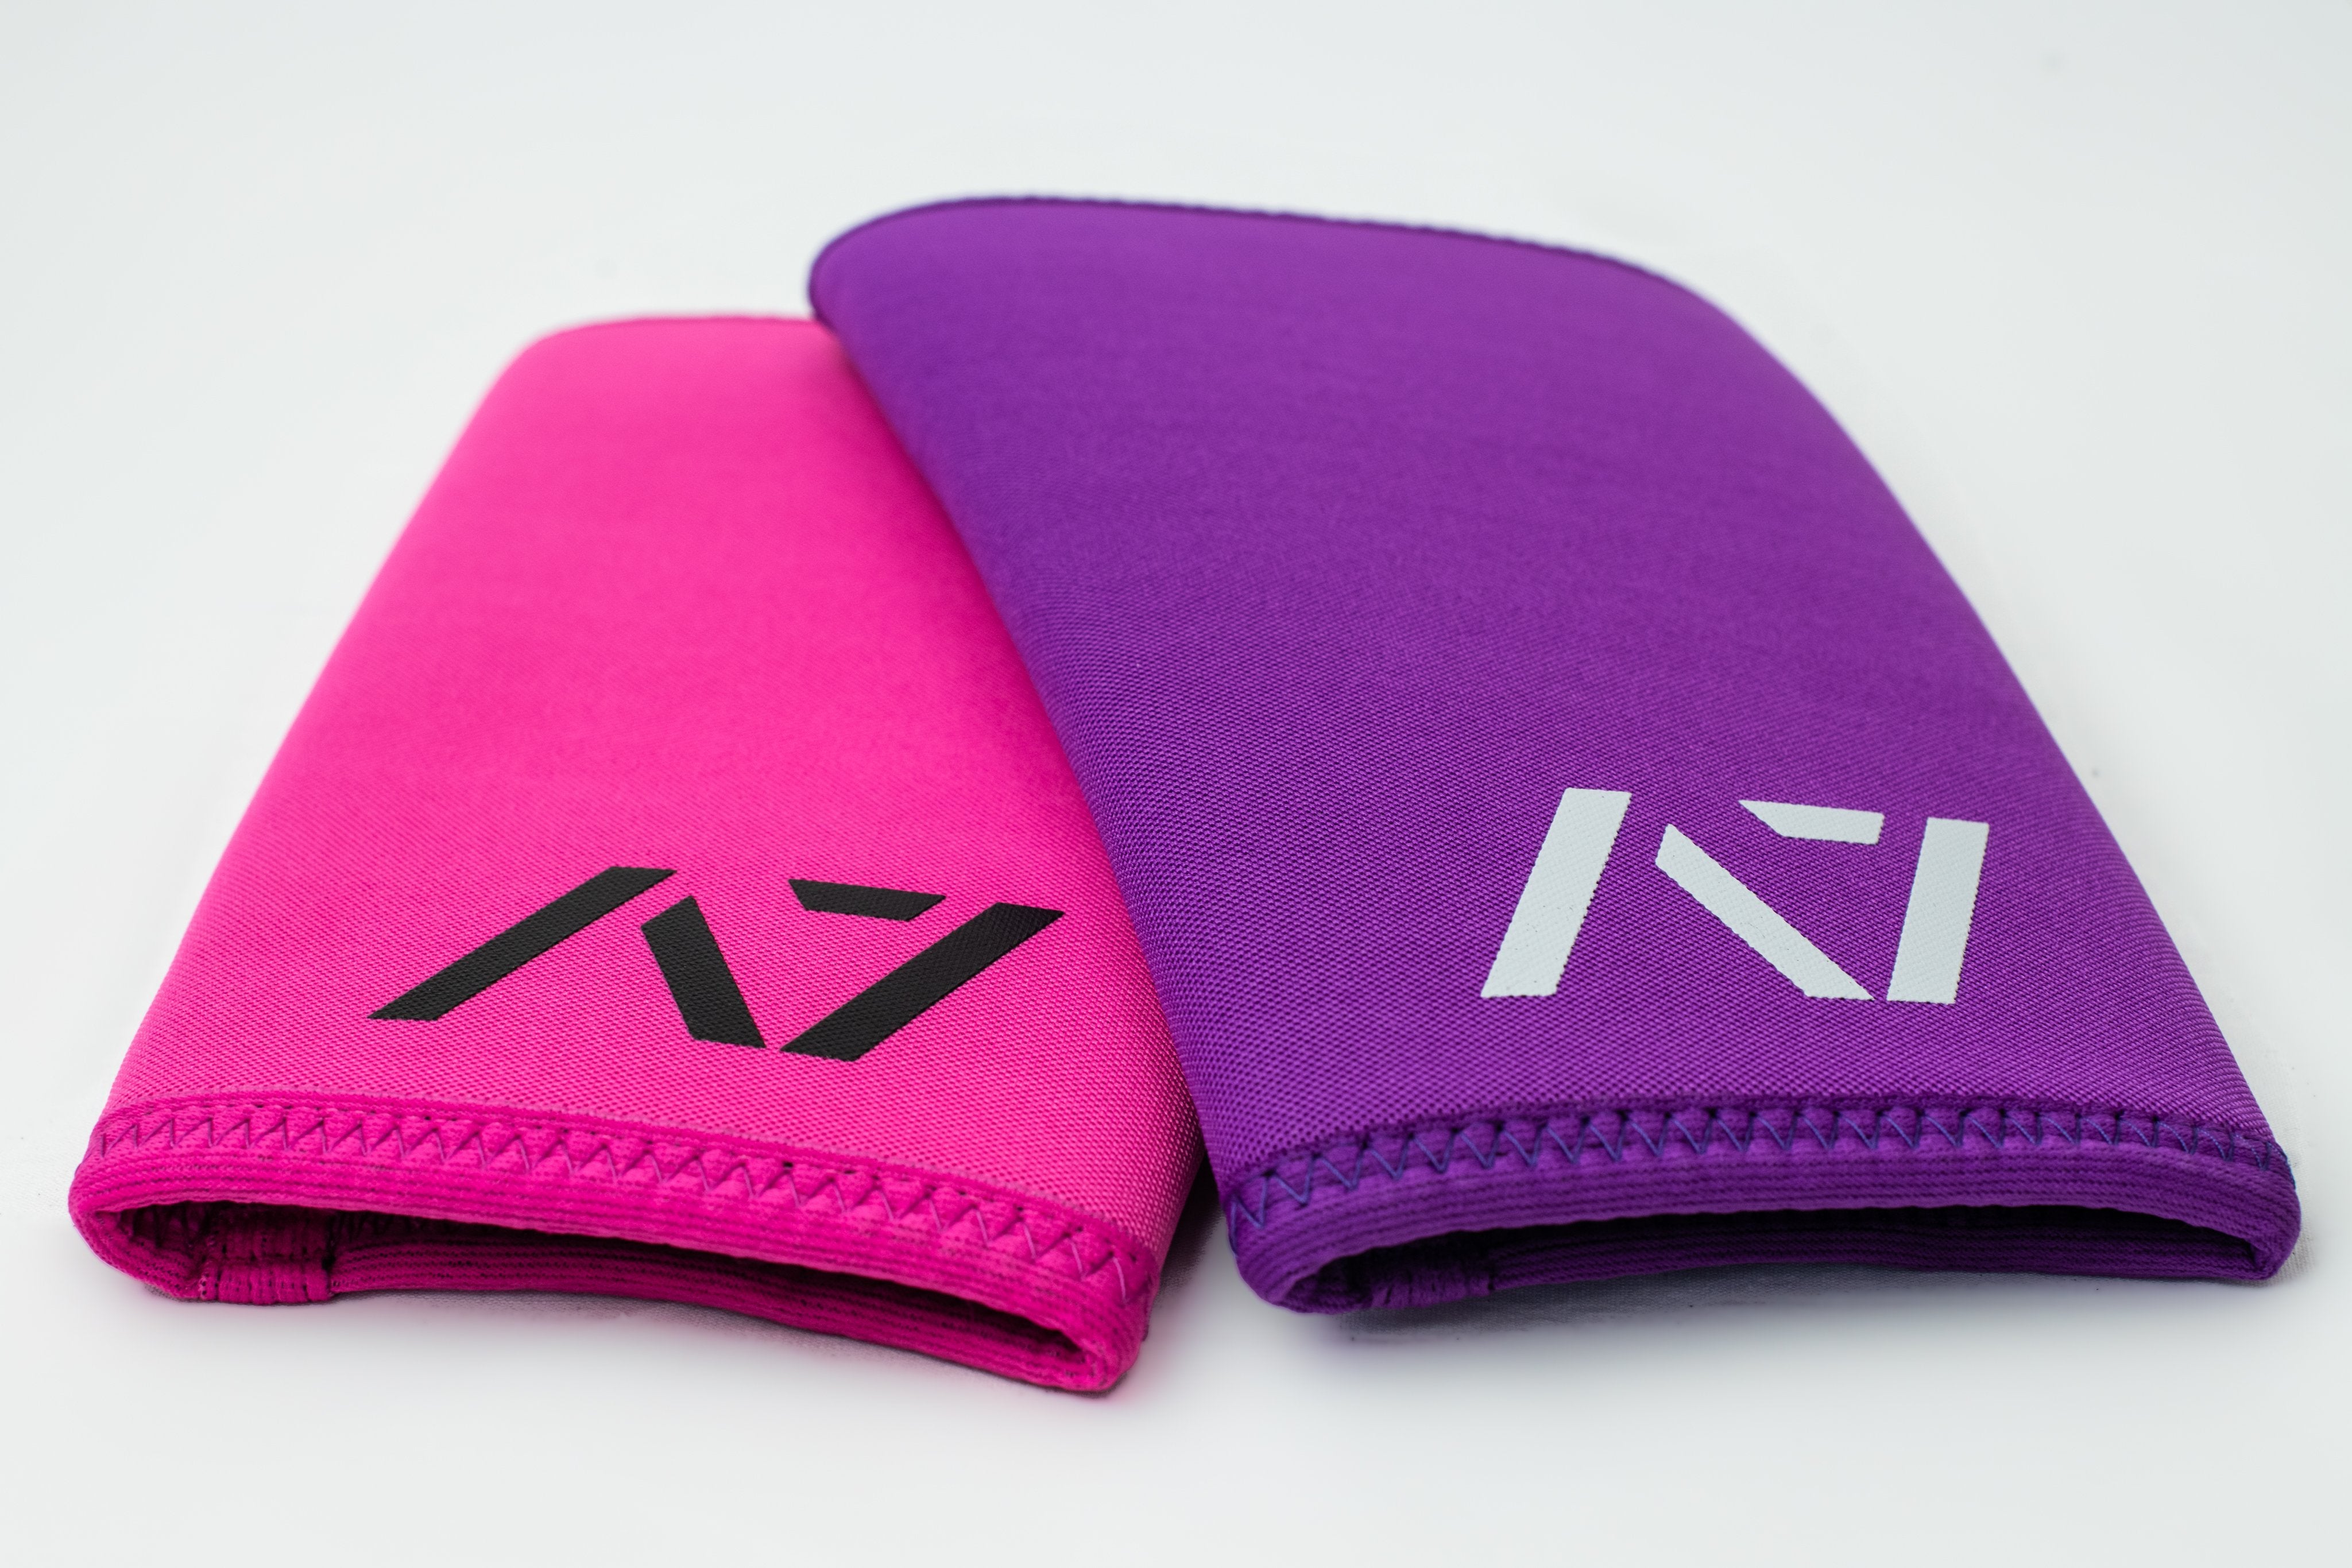 A7 IPF approved Purple CONE knee sleeves are structured with a downward cut panel on the back of the quad and calf to ensure ultimate compression at the knee joint. A7 CONE knee sleeves are IPF approved for use in all powerlifting competitions. A7 cone knee sleeves are made with high quality neoprene and the knee sleeves are sold as a pair. The double seem on the knee sleeves create a greater tension on the knee joint. Available in UK and Europe including France, Italy, Germany, Sweden and Poland